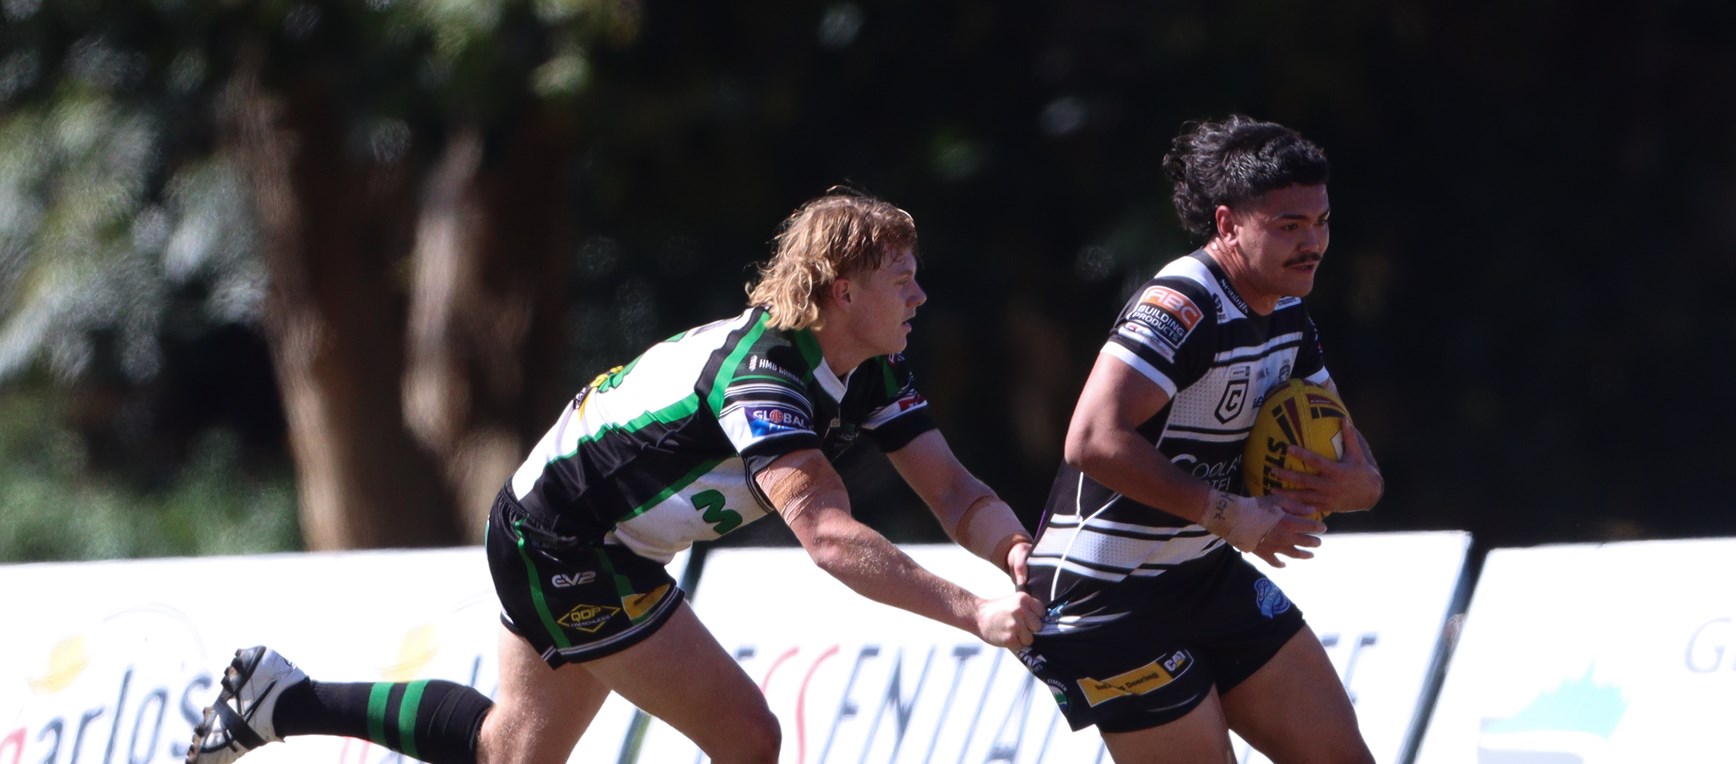 In pictures: Tweed Seagulls v Townsville Blackhawks